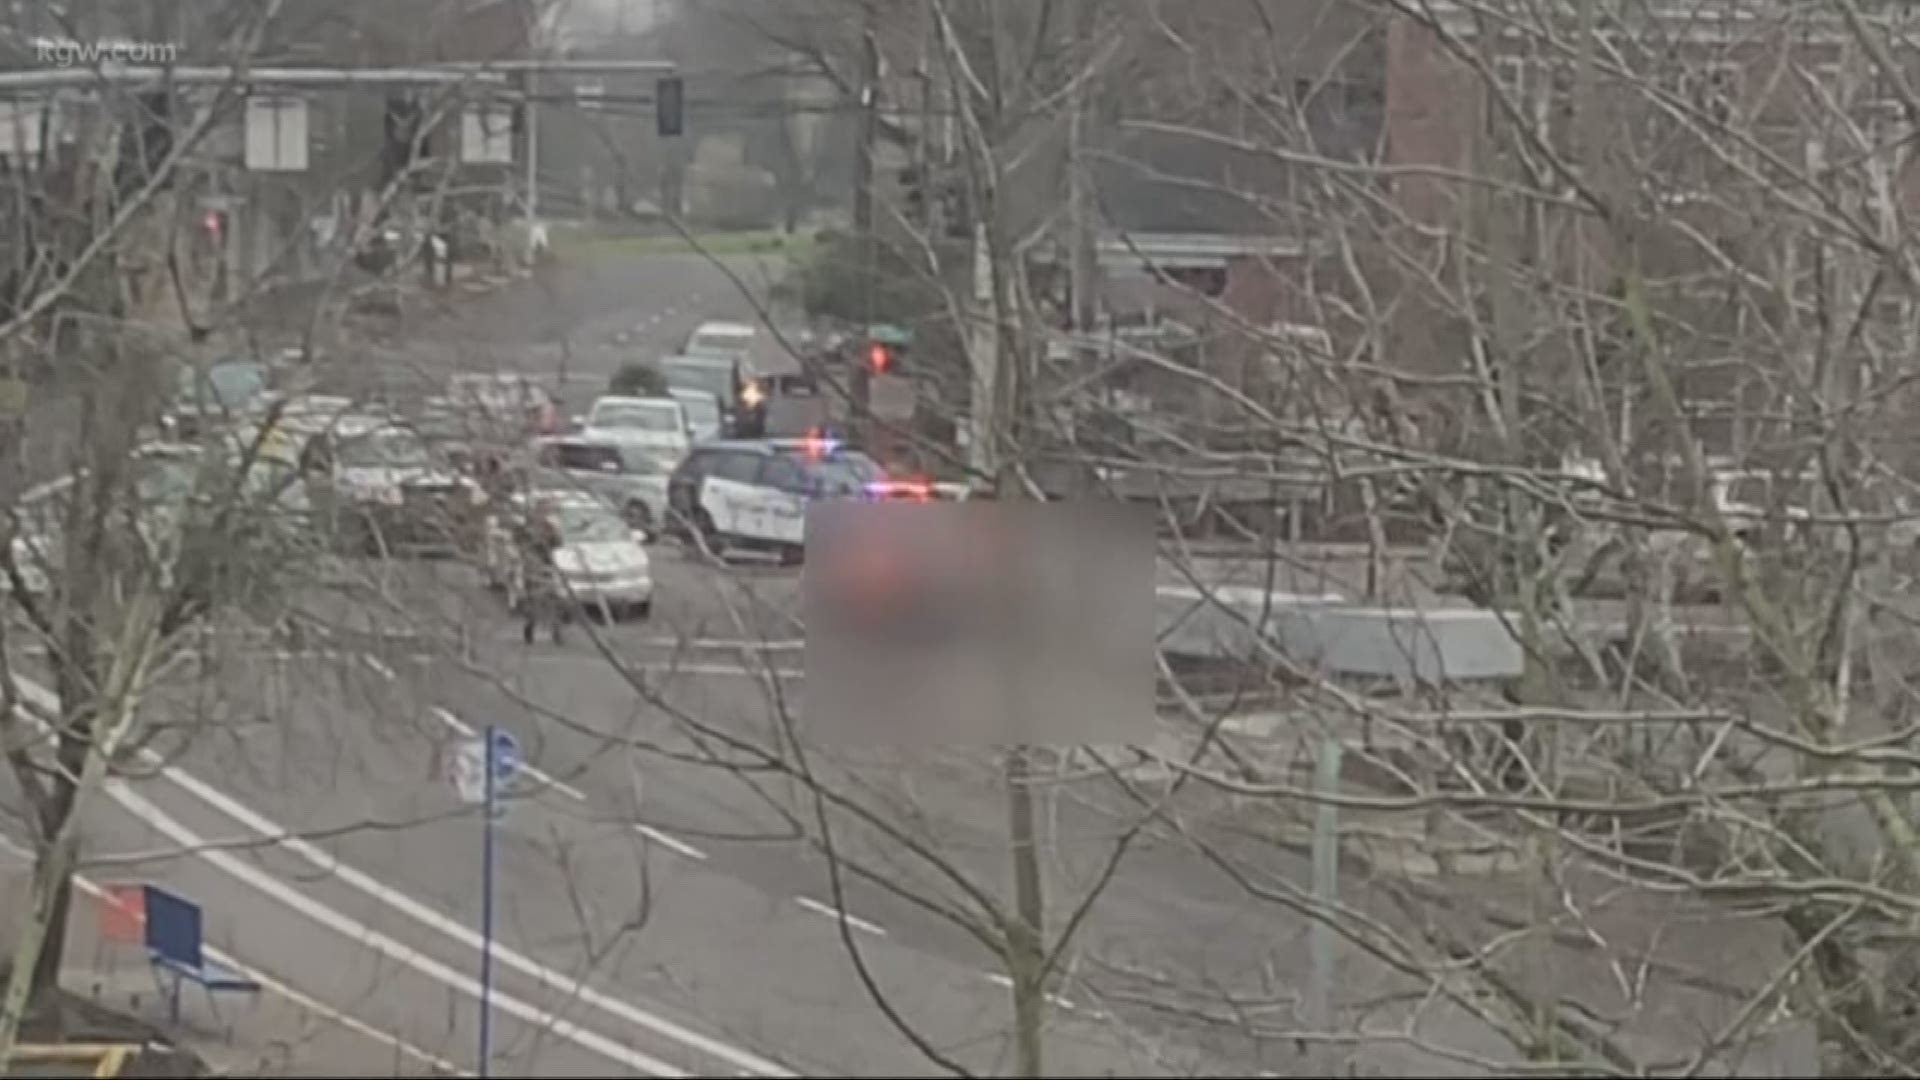 Portland police said a subject was shot and killed, but would not confirm if they were a man or woman. No officers were hurt, police said.